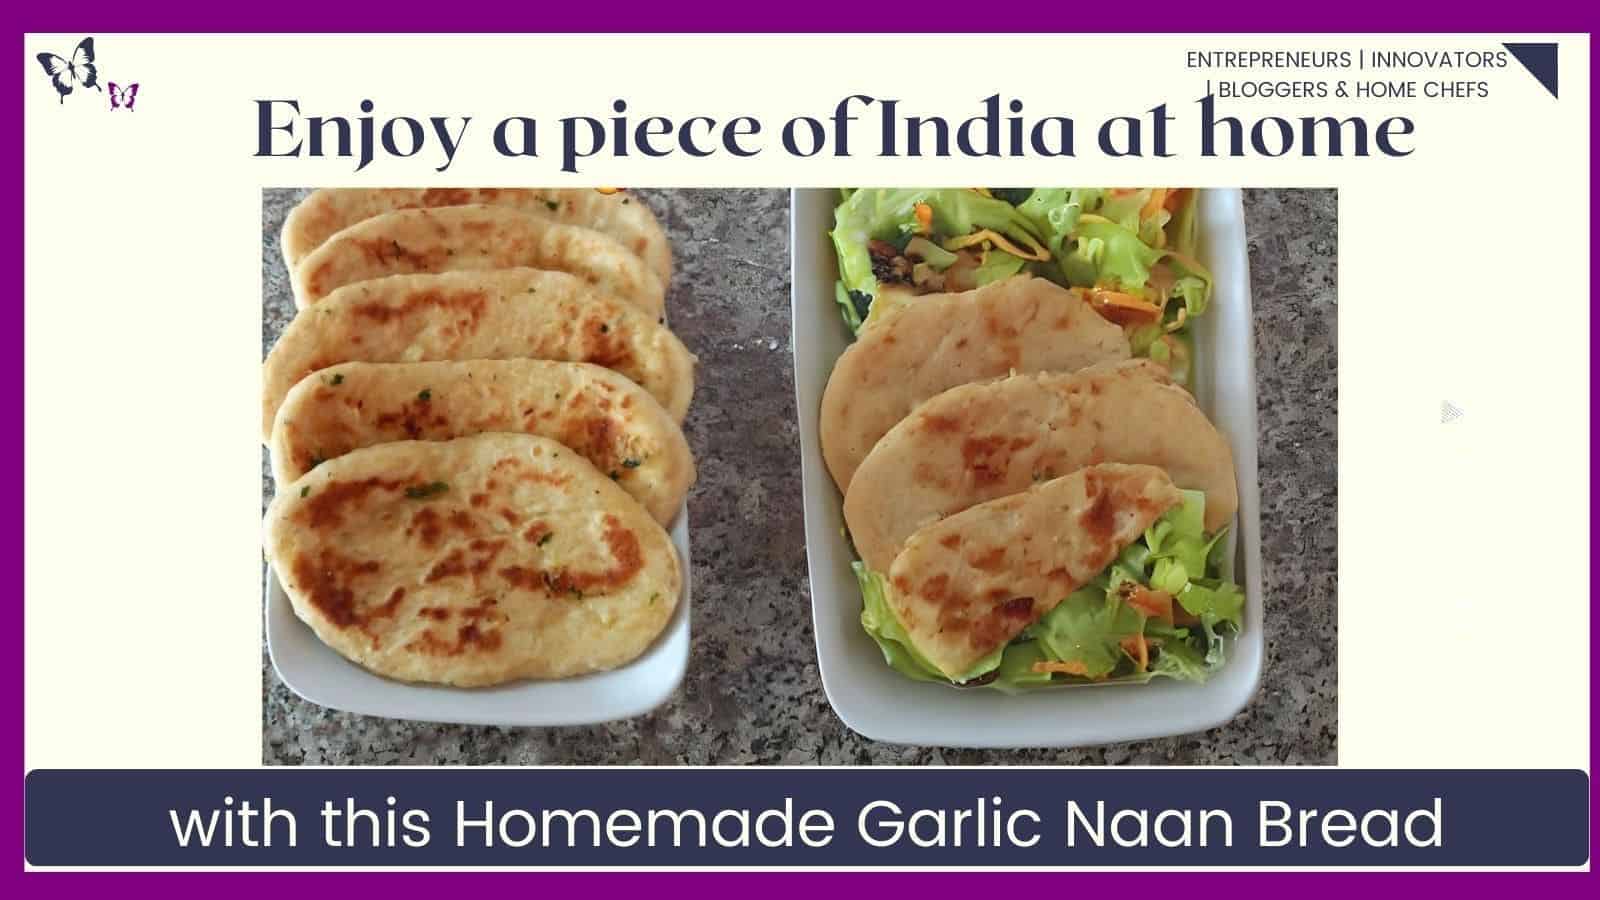 An image of Homemade Garlic Naan Bread on a white dish